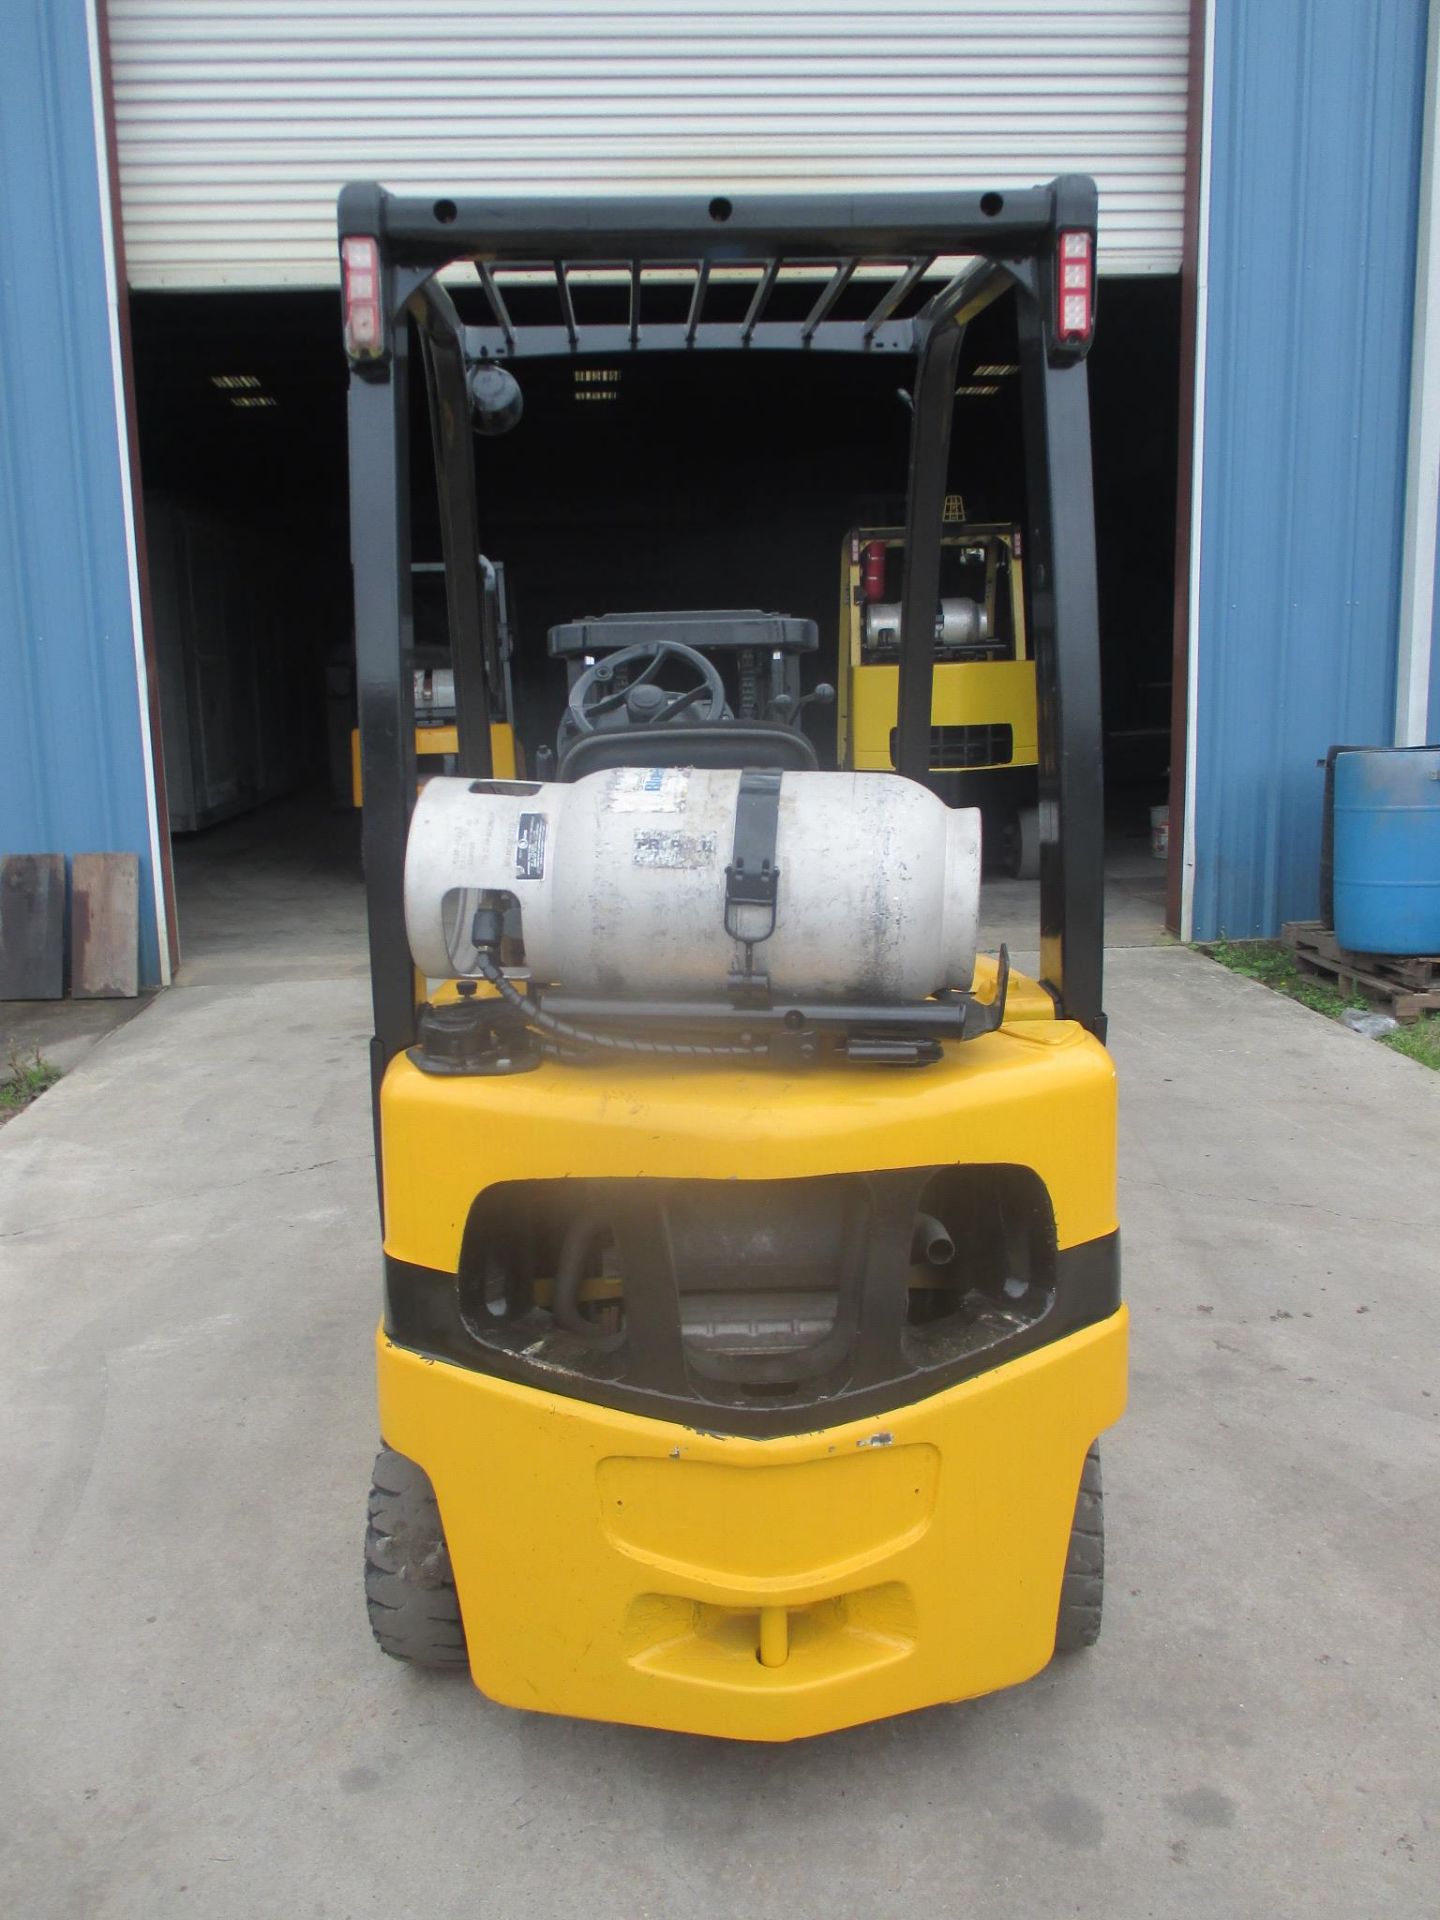 FORKLIFT, YALE 4,000 LB. CAP. MDL. GLP040, new 2008, LPG, 2-stage mast, 84" max. lift ht., pneu. - Image 3 of 4